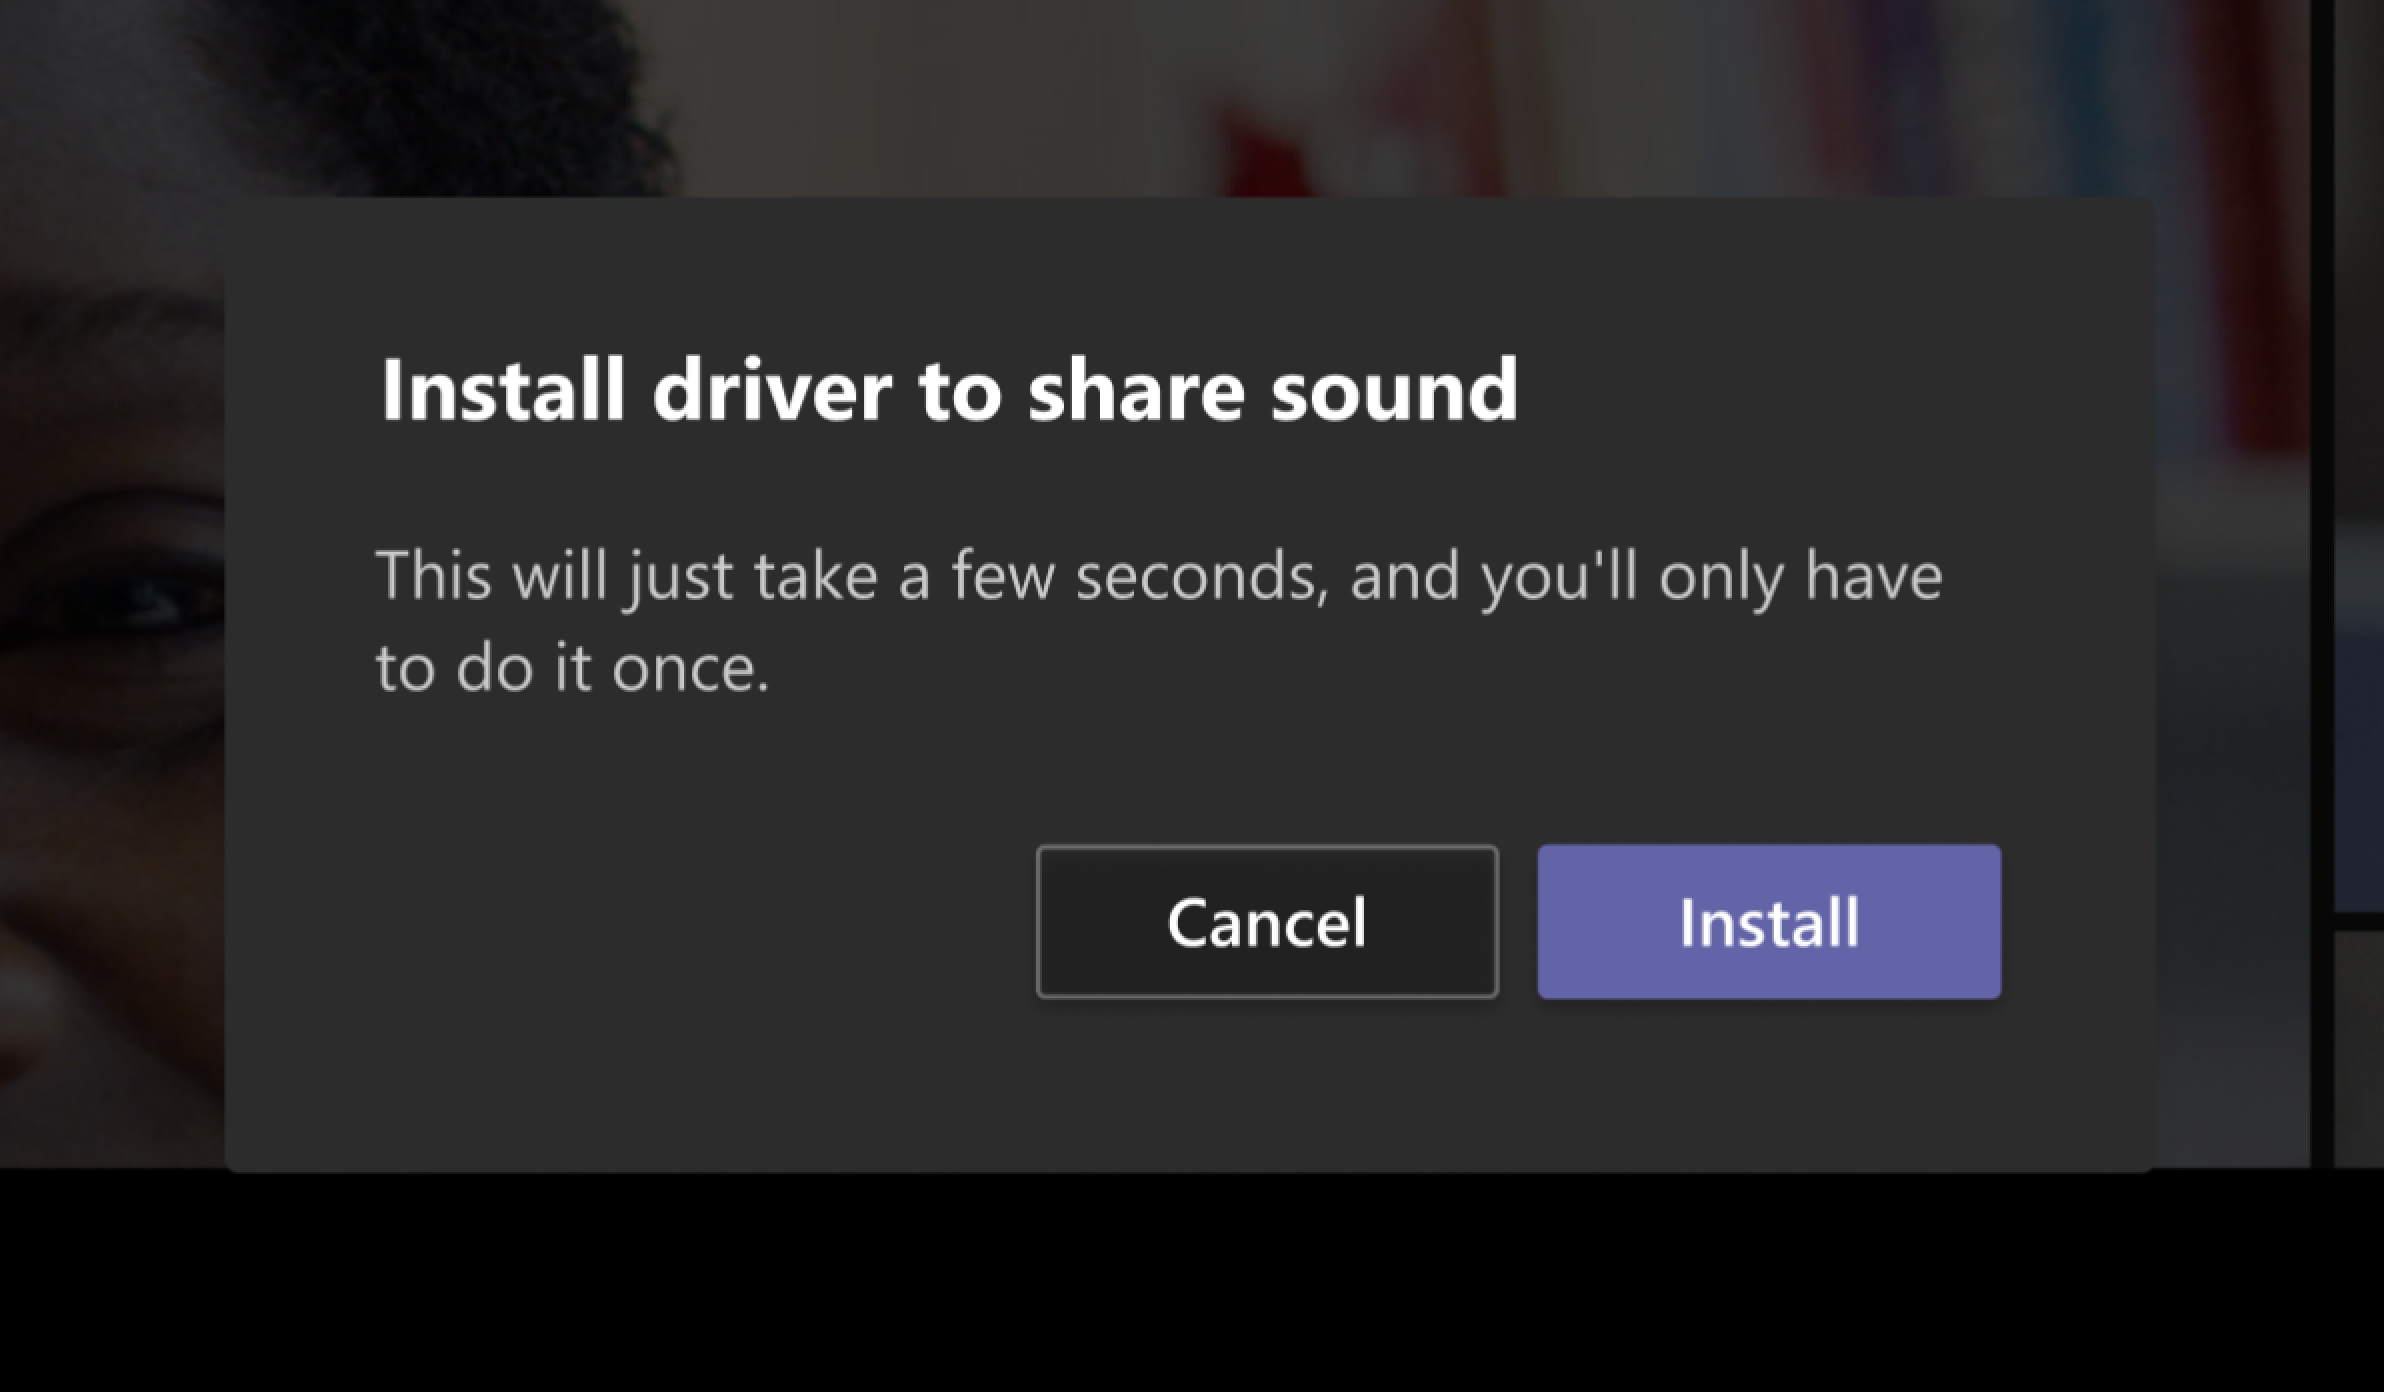 Install driver